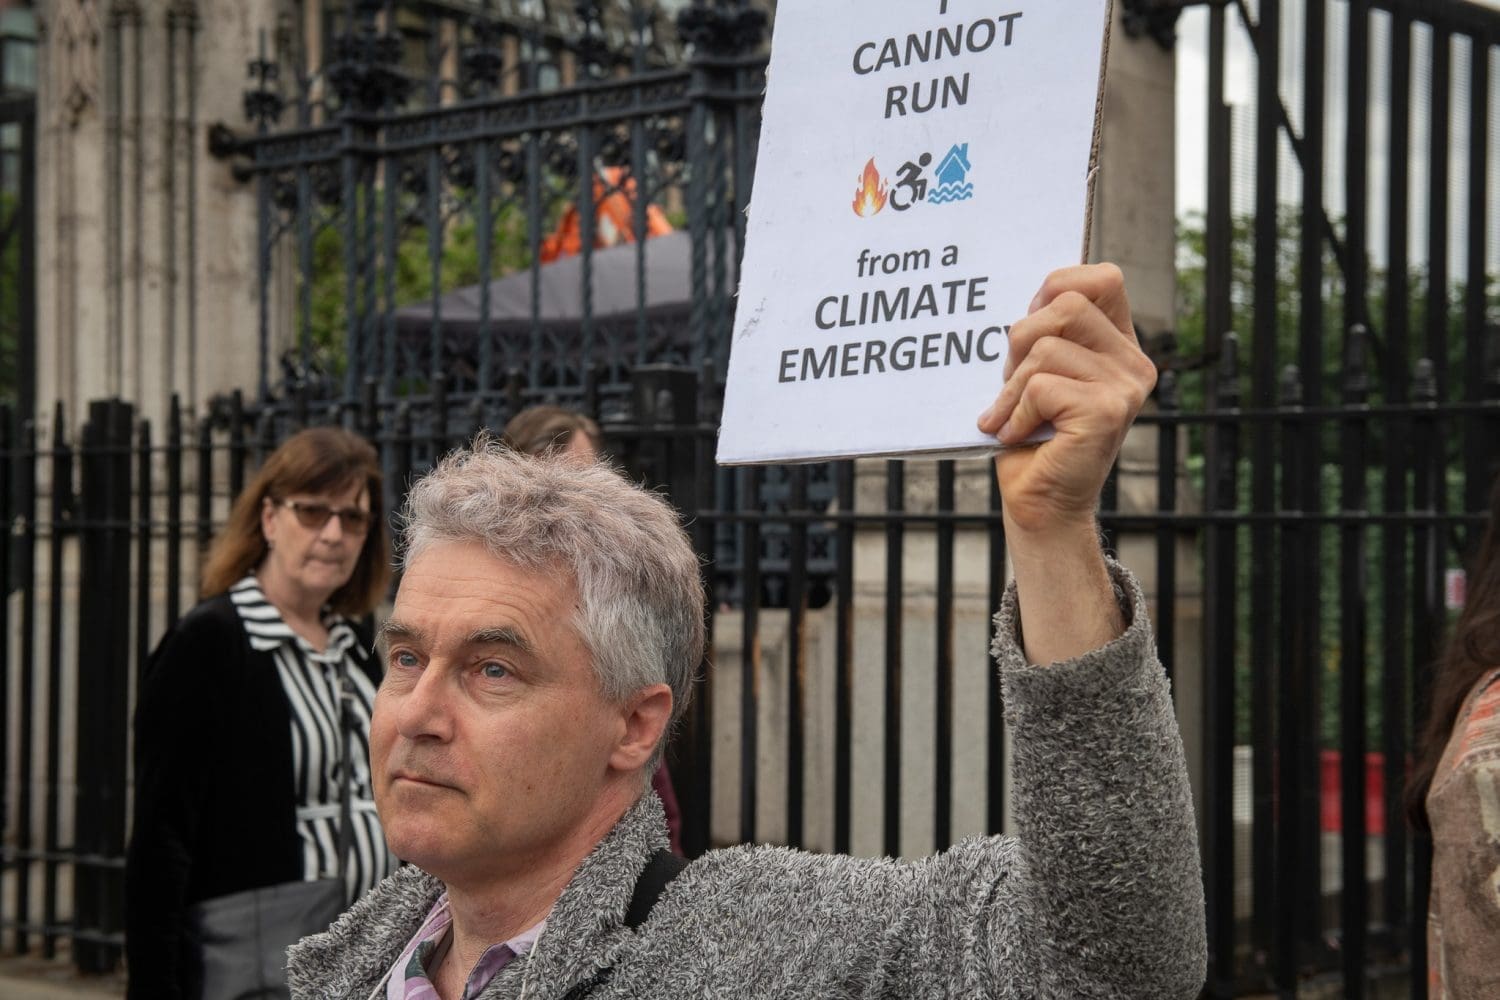 Neil Goodwin outside parliament holding up a sign that reads 'i cannot run from the climate emergency'